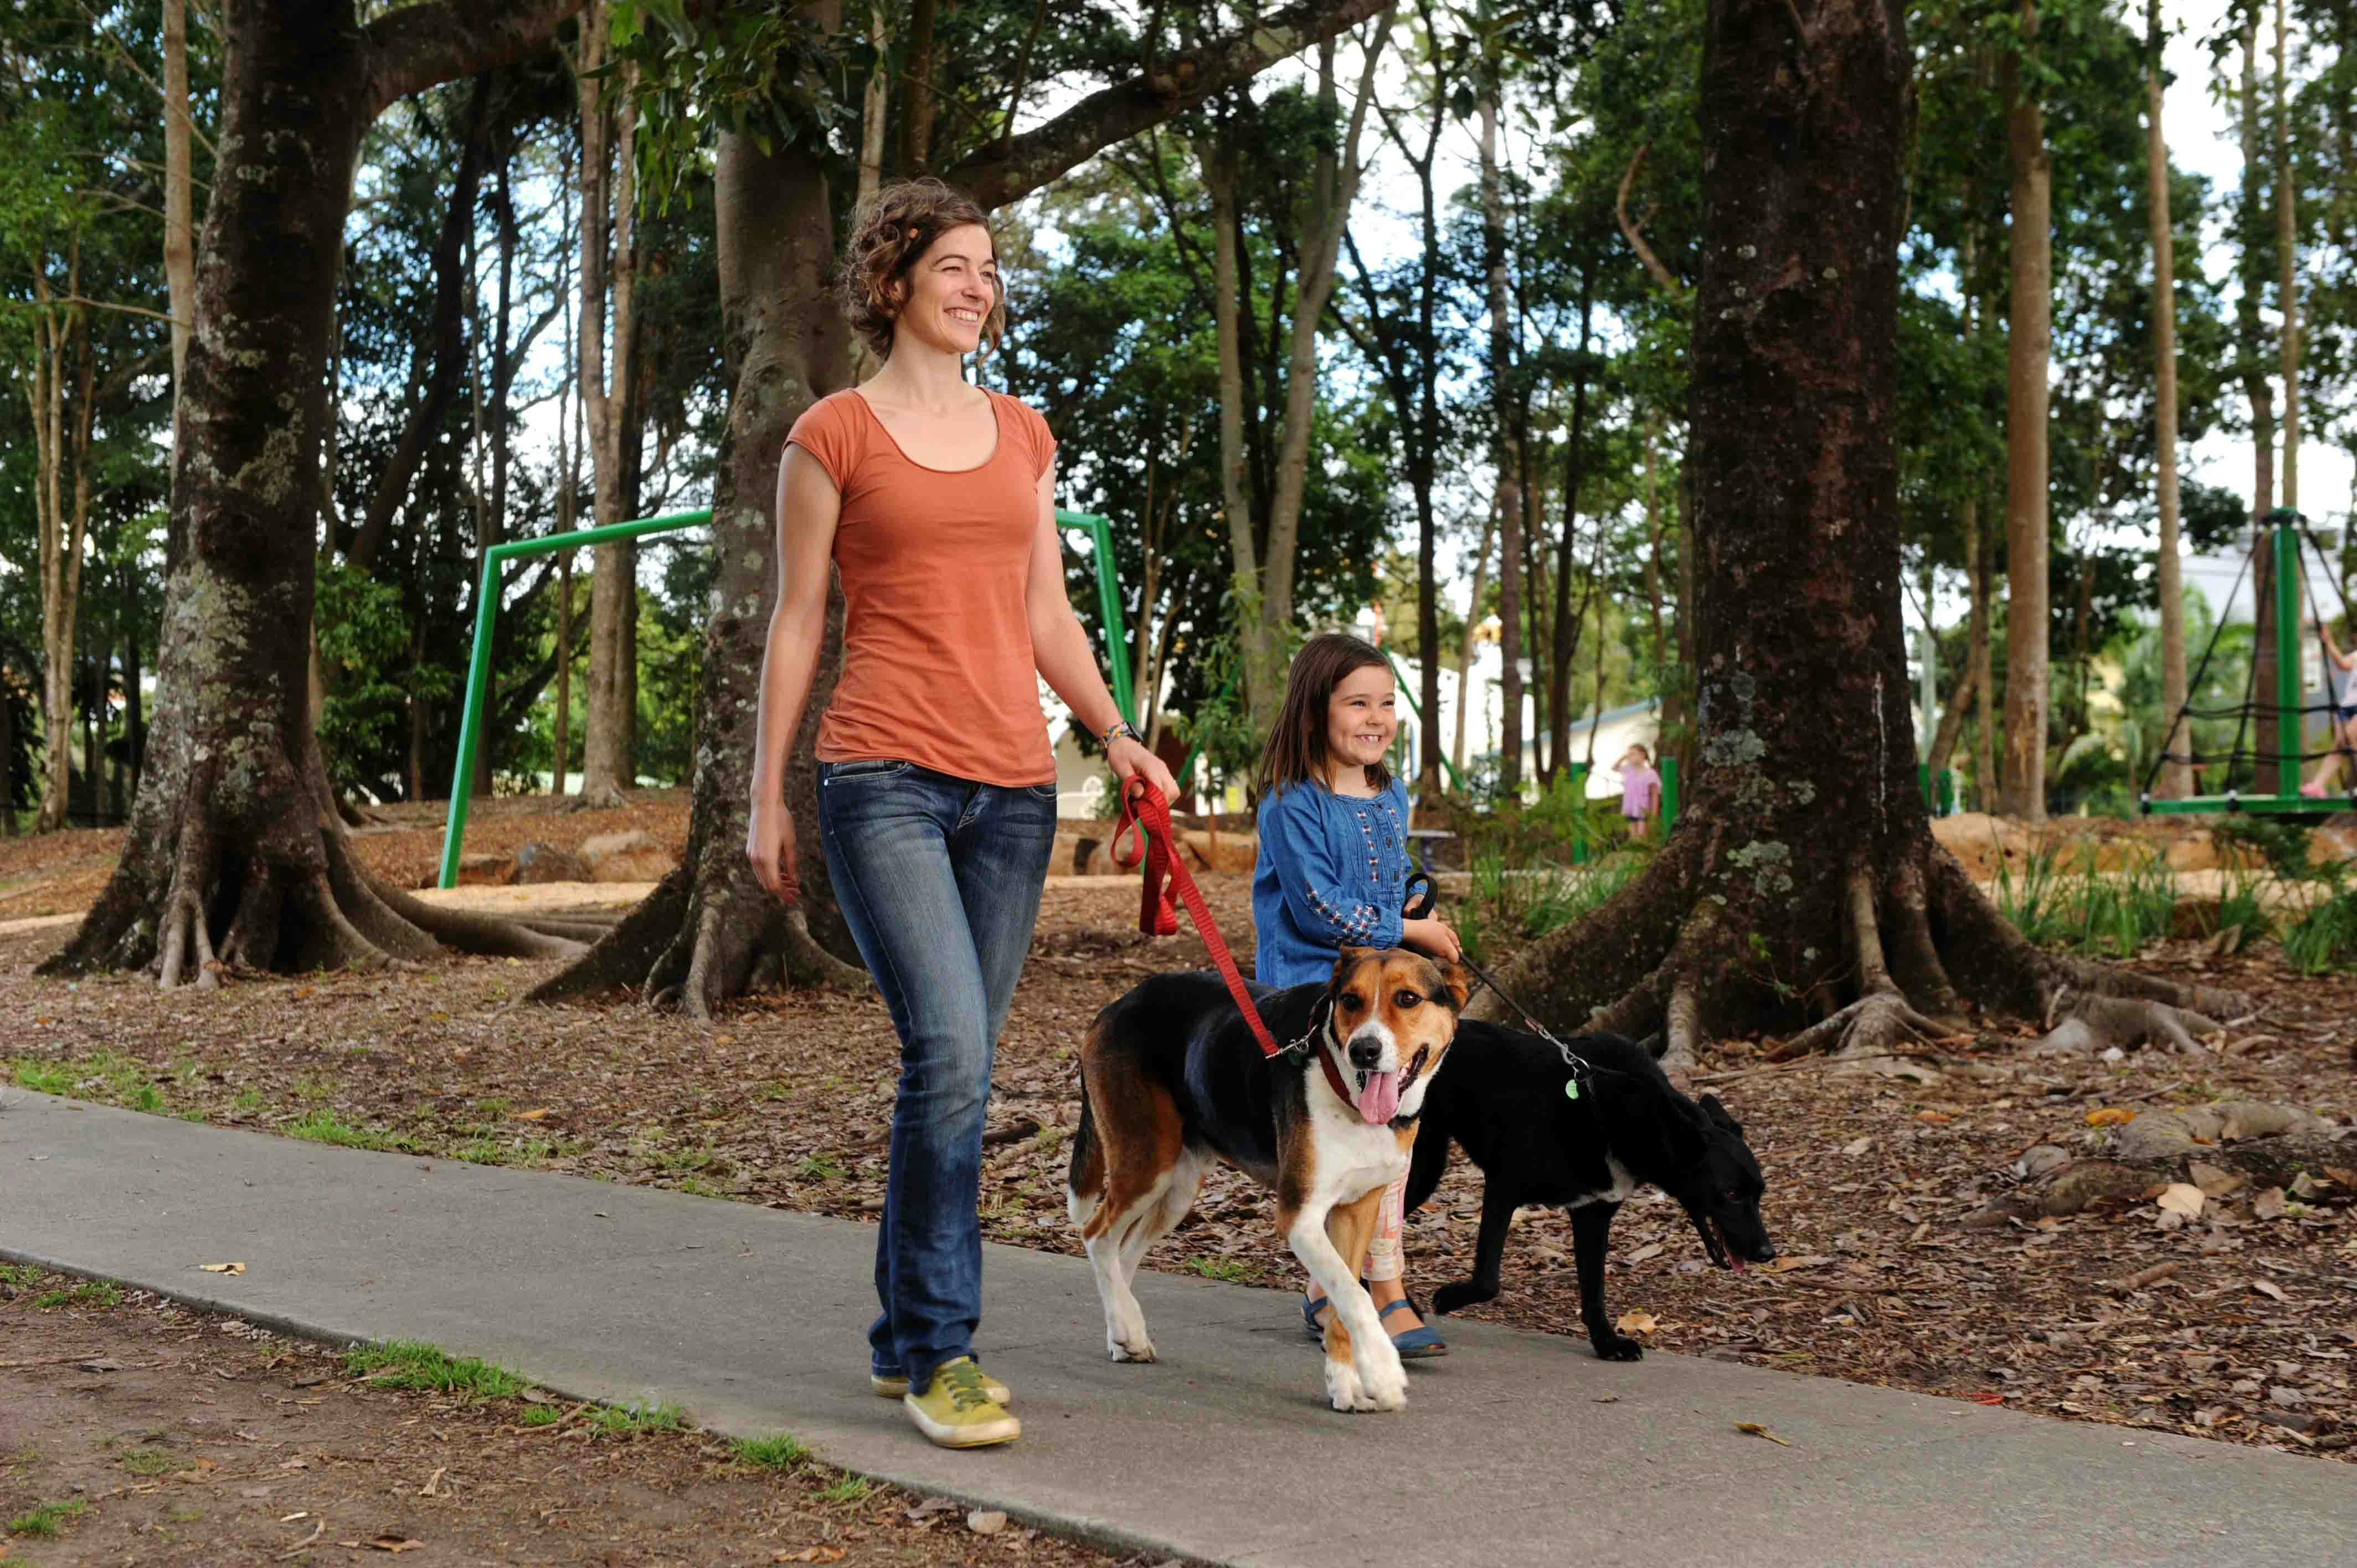 Open space includes places to safely walk dogs, including off-leash areas.